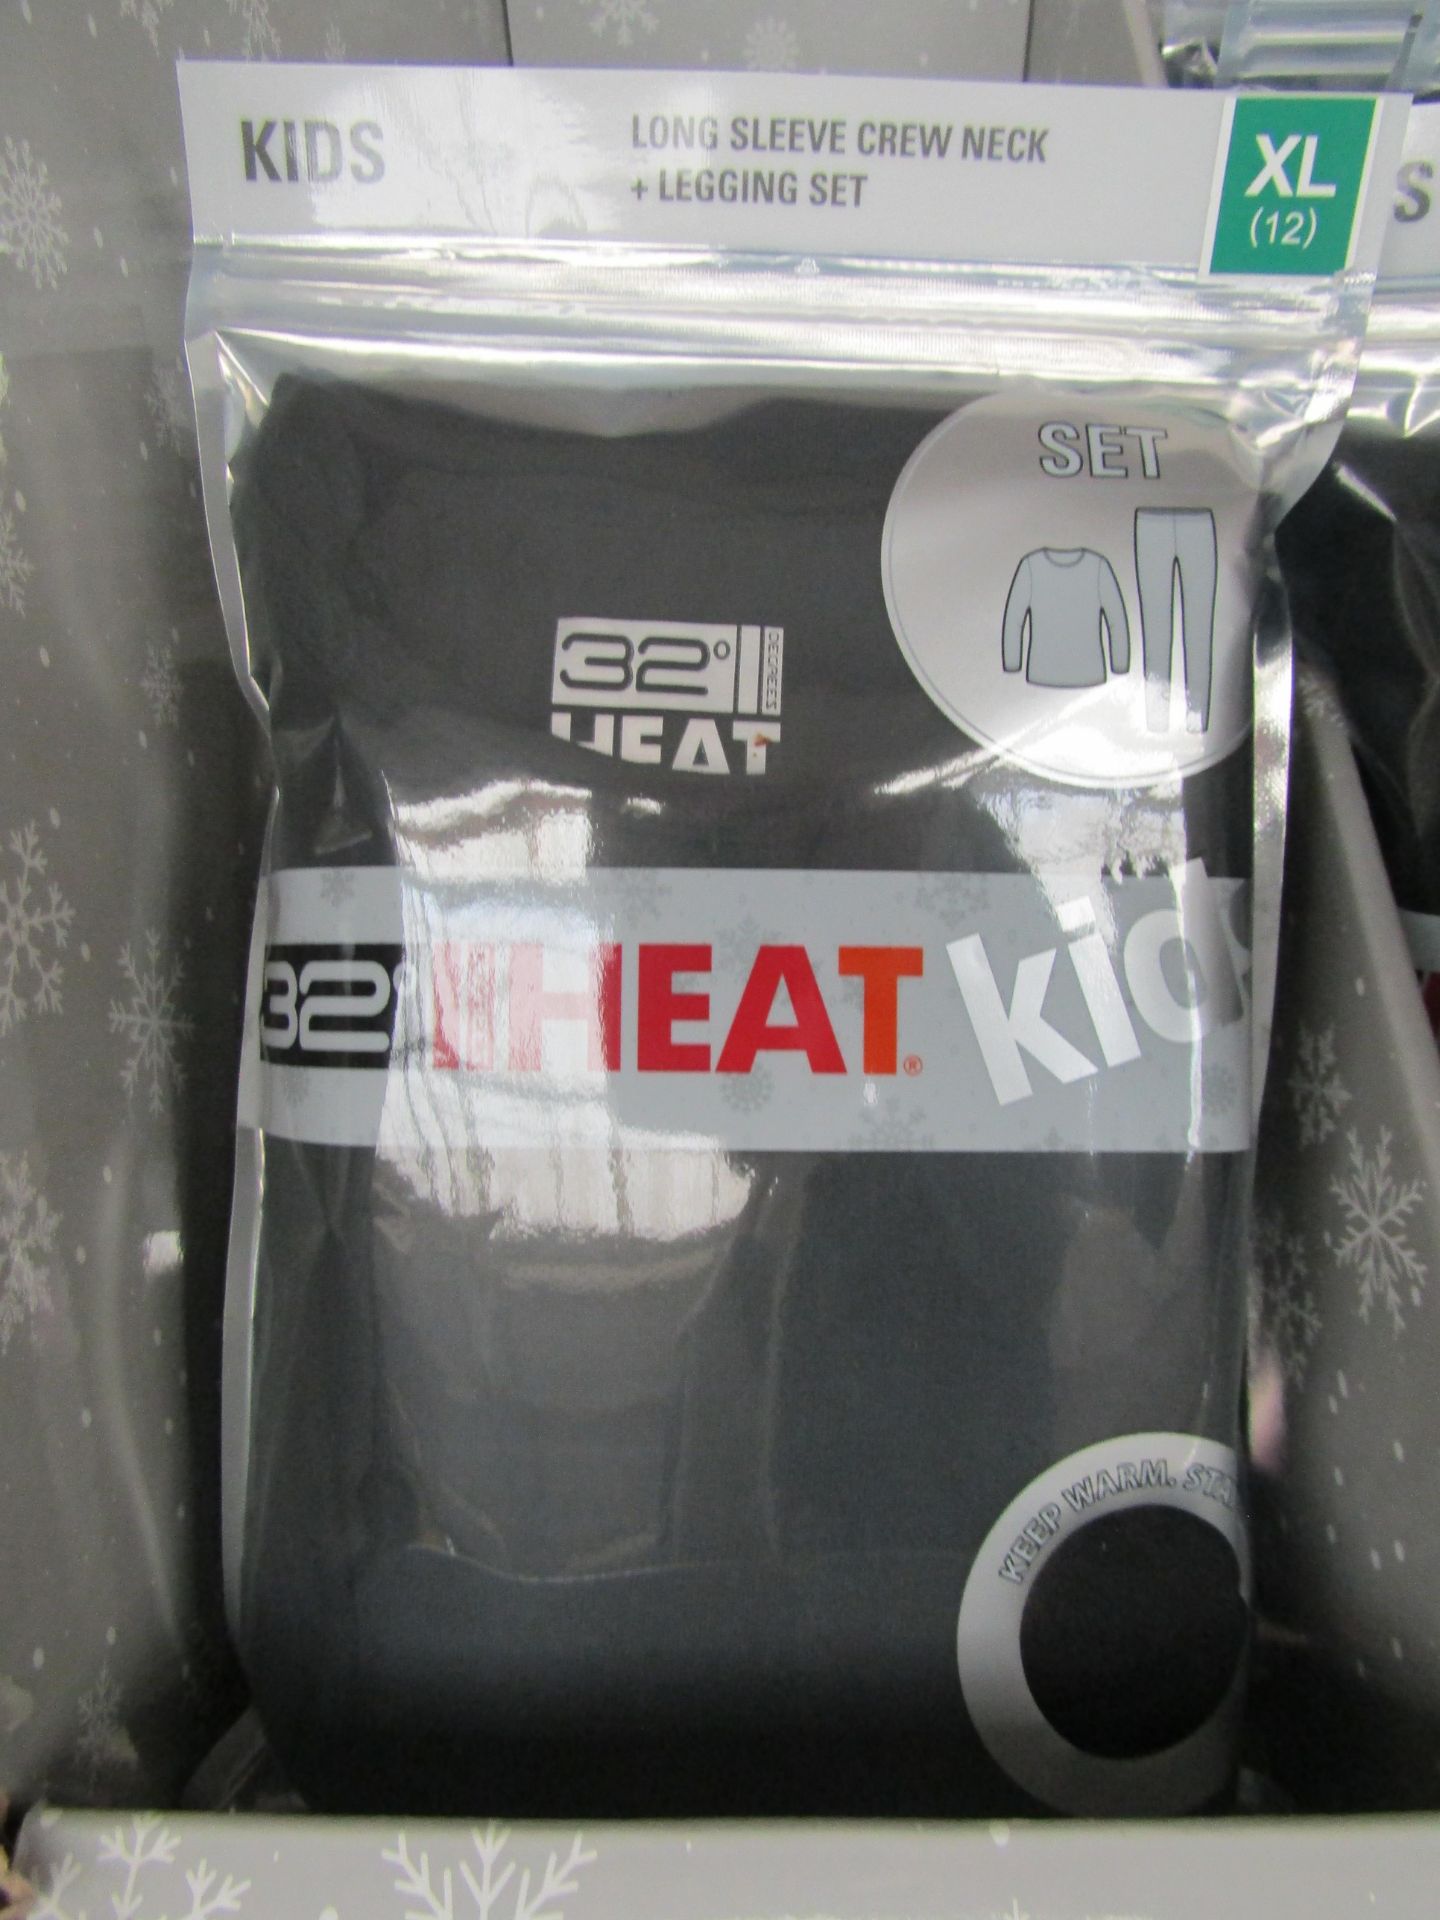 1 x 32 Degrees Heat Long Sleeve Crew Neck & Legging Set size XL new & packaged see image